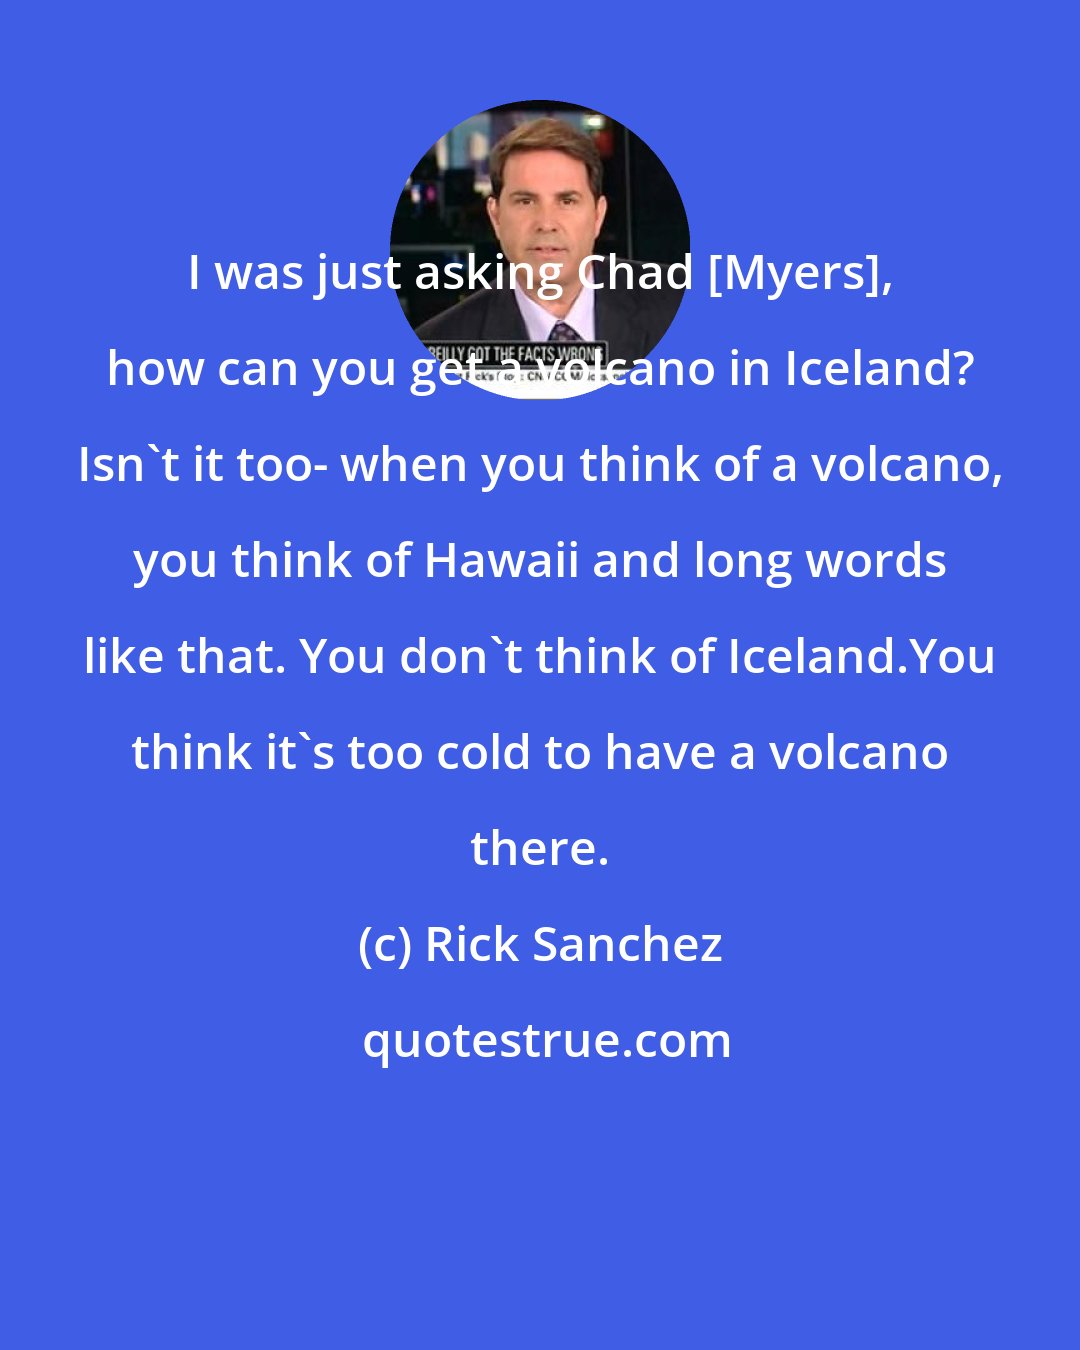 Rick Sanchez: I was just asking Chad [Myers], how can you get a volcano in Iceland? Isn't it too- when you think of a volcano, you think of Hawaii and long words like that. You don't think of Iceland.You think it's too cold to have a volcano there.